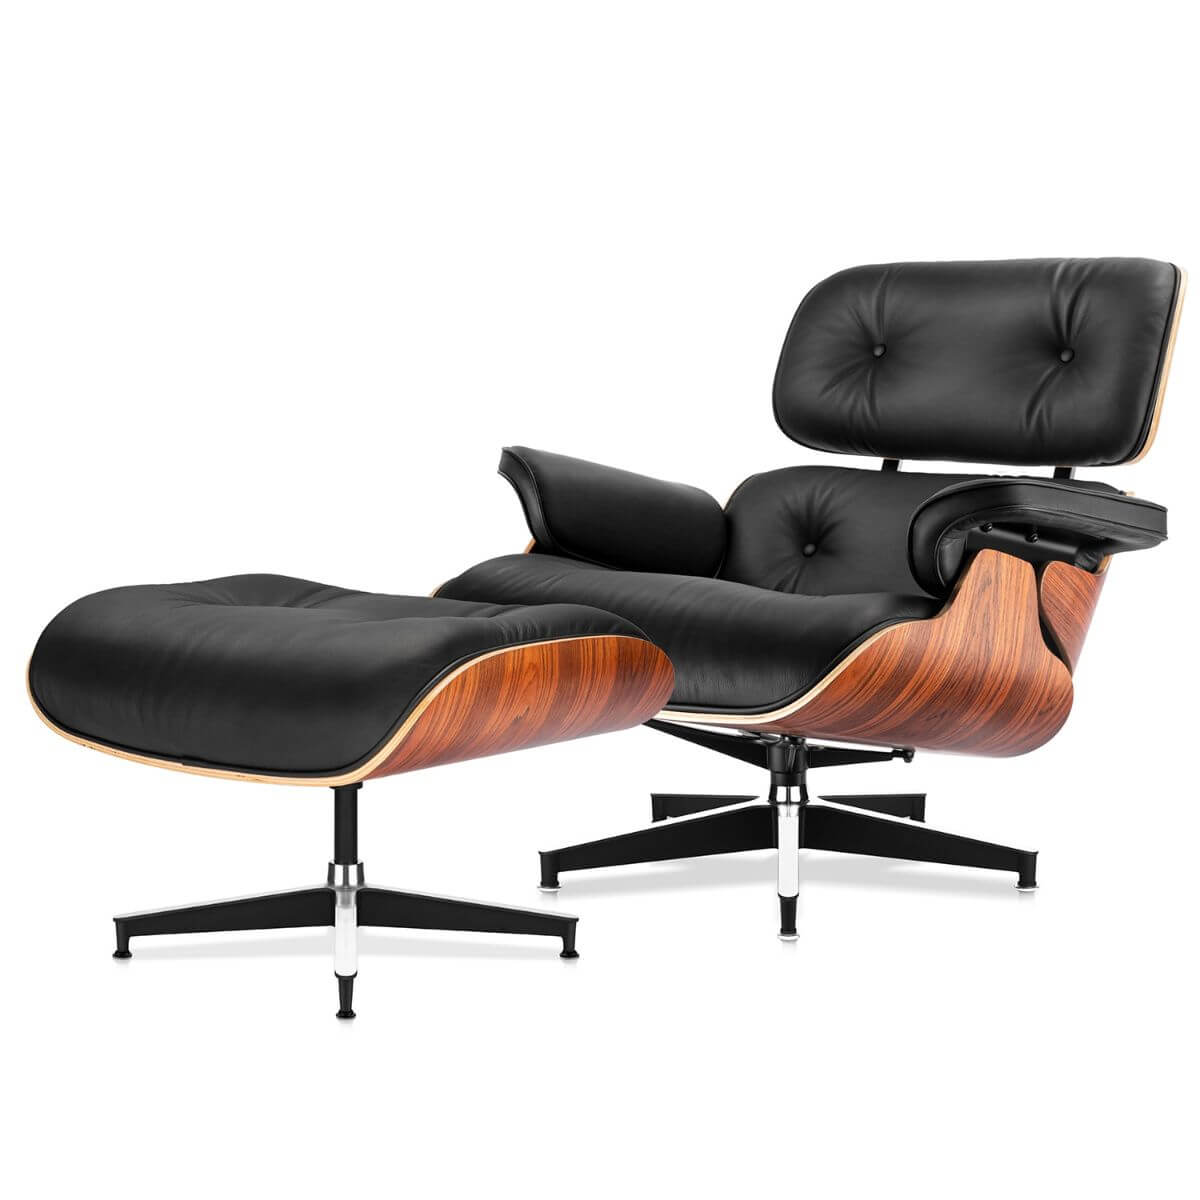 Luxuriance Designs - Eames Lounge Chair and Ottoman Replica (Premium Tall Version) - Palisander Black - Review